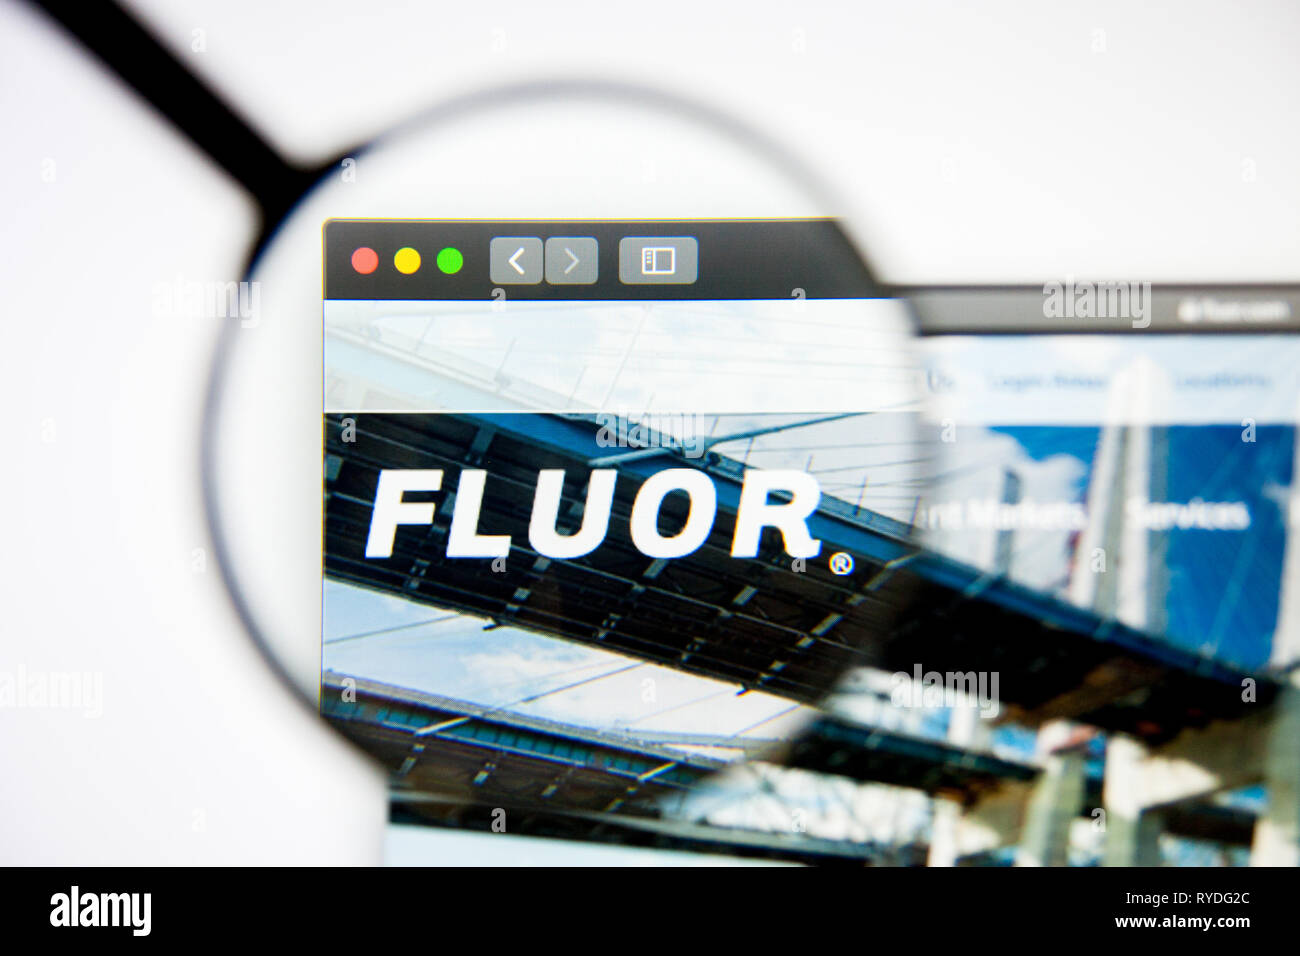 Los Angeles, California, USA - 5 March 2019: Fluor website homepage. Fluor logo visible on display screen, Illustrative Editorial Stock Photo